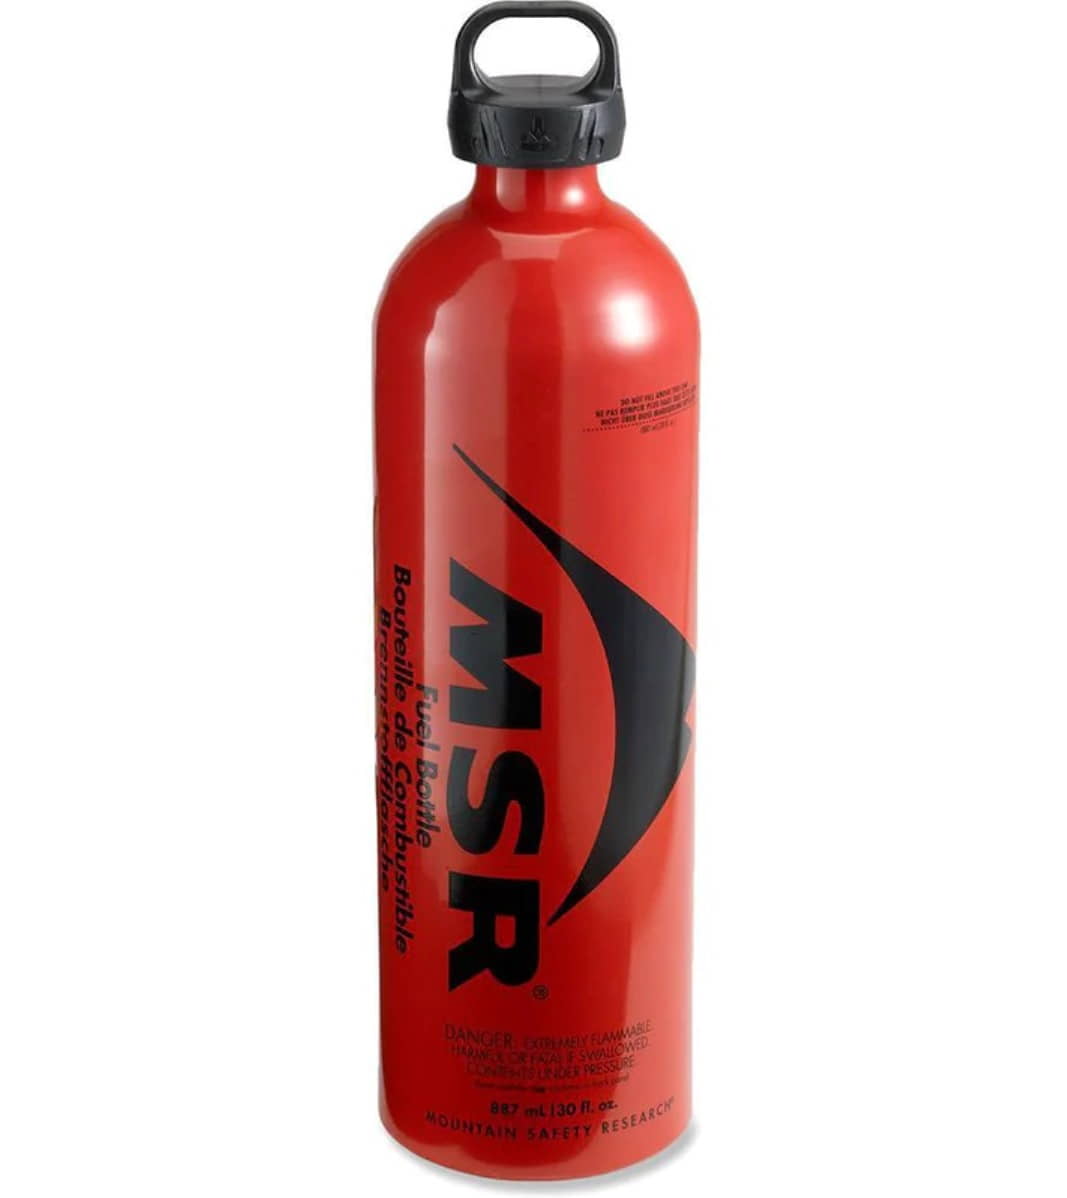 MSR, MSR Fuel Bottle With Crp Cap (30 Fl. Oz.) MSR Fuel Bottle With Crp Cap (30 Fl. Oz.) 11832, accessories, adventure bike luggage, adventure luggage, dirt bike luggage, dirtbike luggage, enduristan, enduristan uk, enduro luggage, fuel-bottle, luggage, motorbike bags, motorbike luggage, off road luggage, Accessories, - The World’s Toughest Waterproof Luggage for Adventure Bikes. Imported and distributed in North &amp; South America by Lindeco Genuine Powersports.